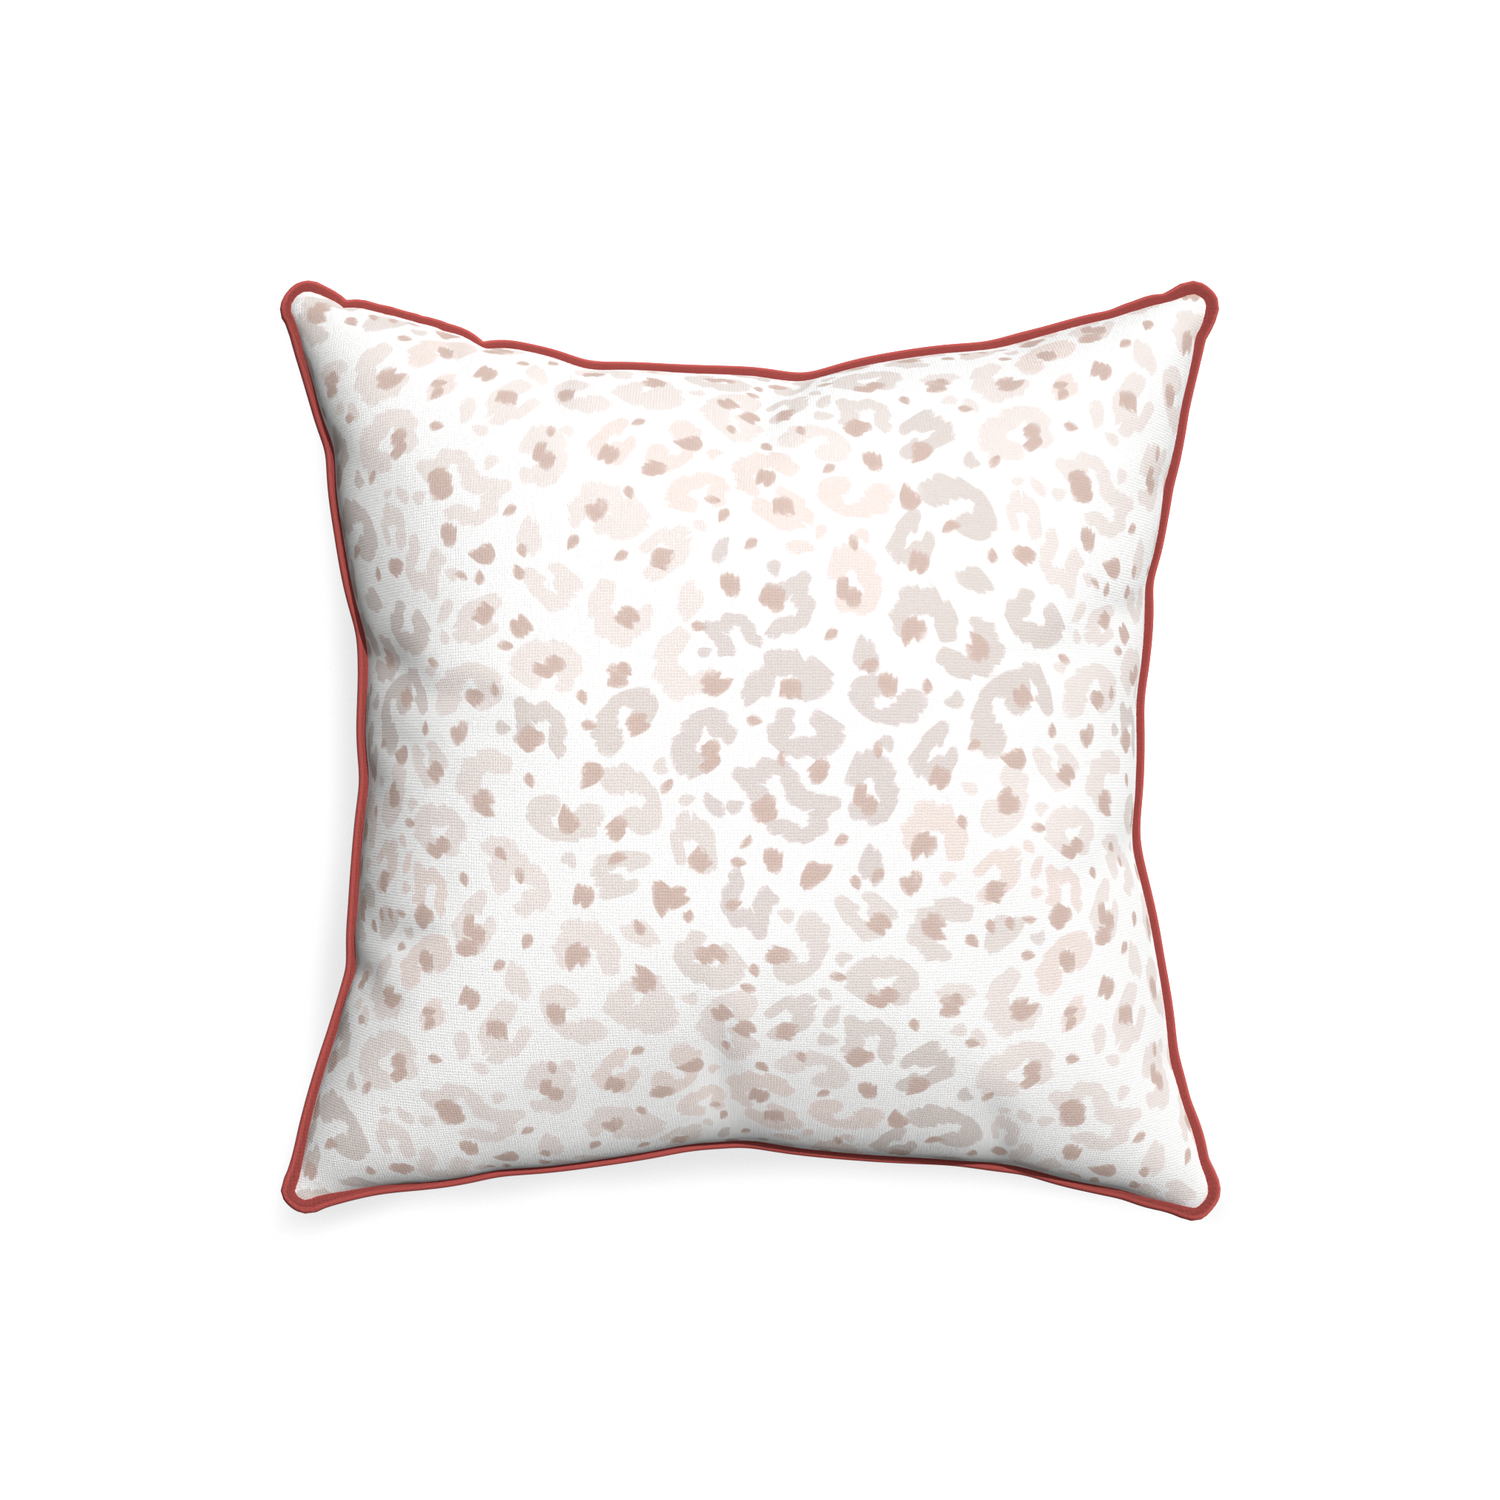 20-square rosie custom pillow with c piping on white background